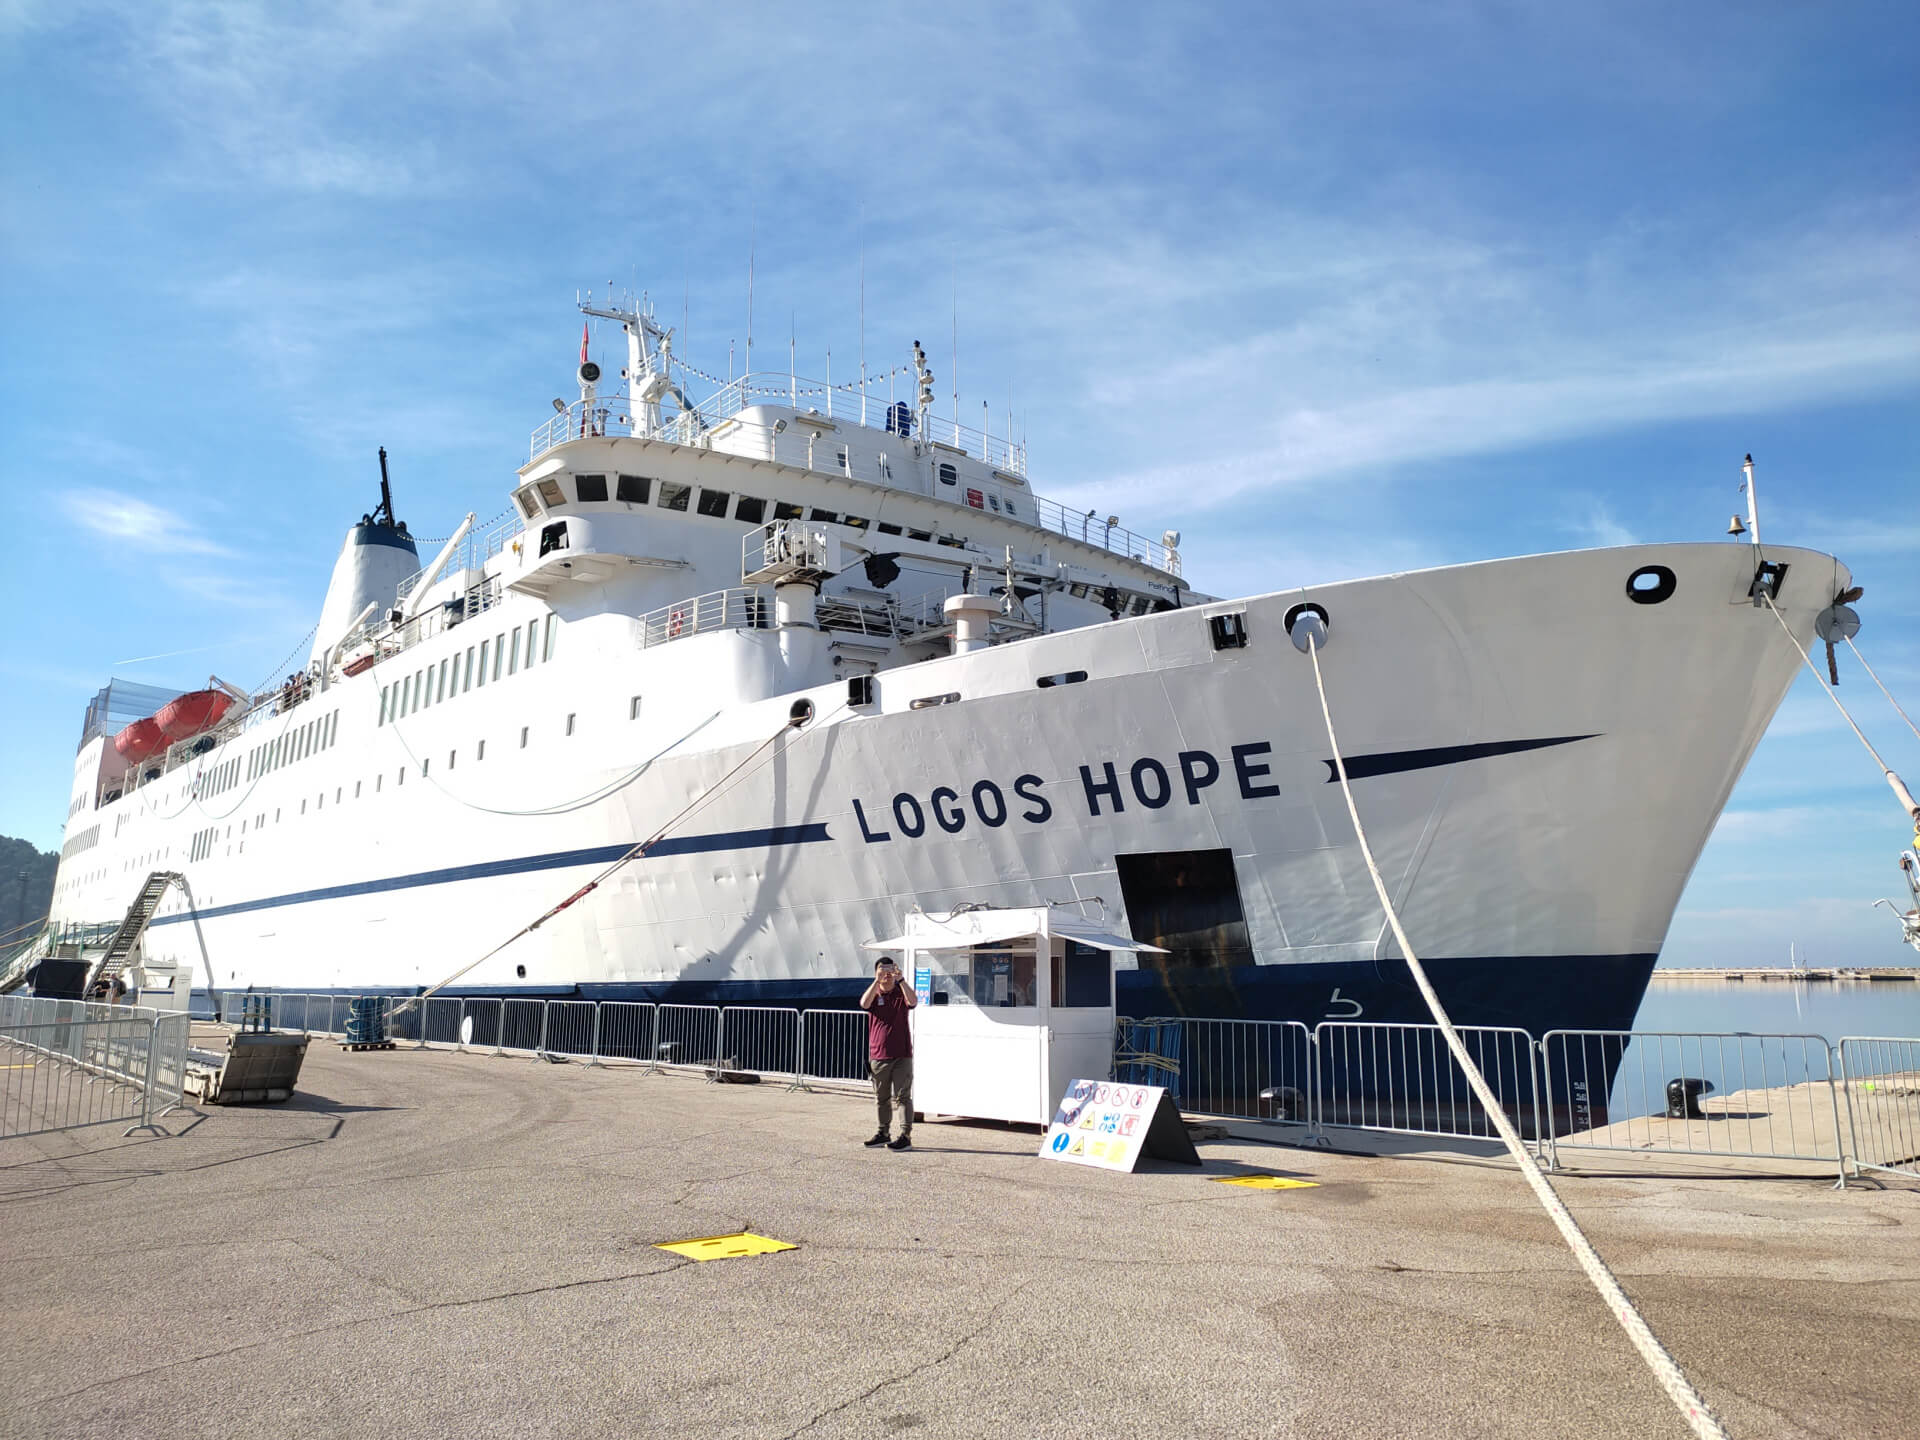 Logos Hope - The Largest Bookstore Ship in the World